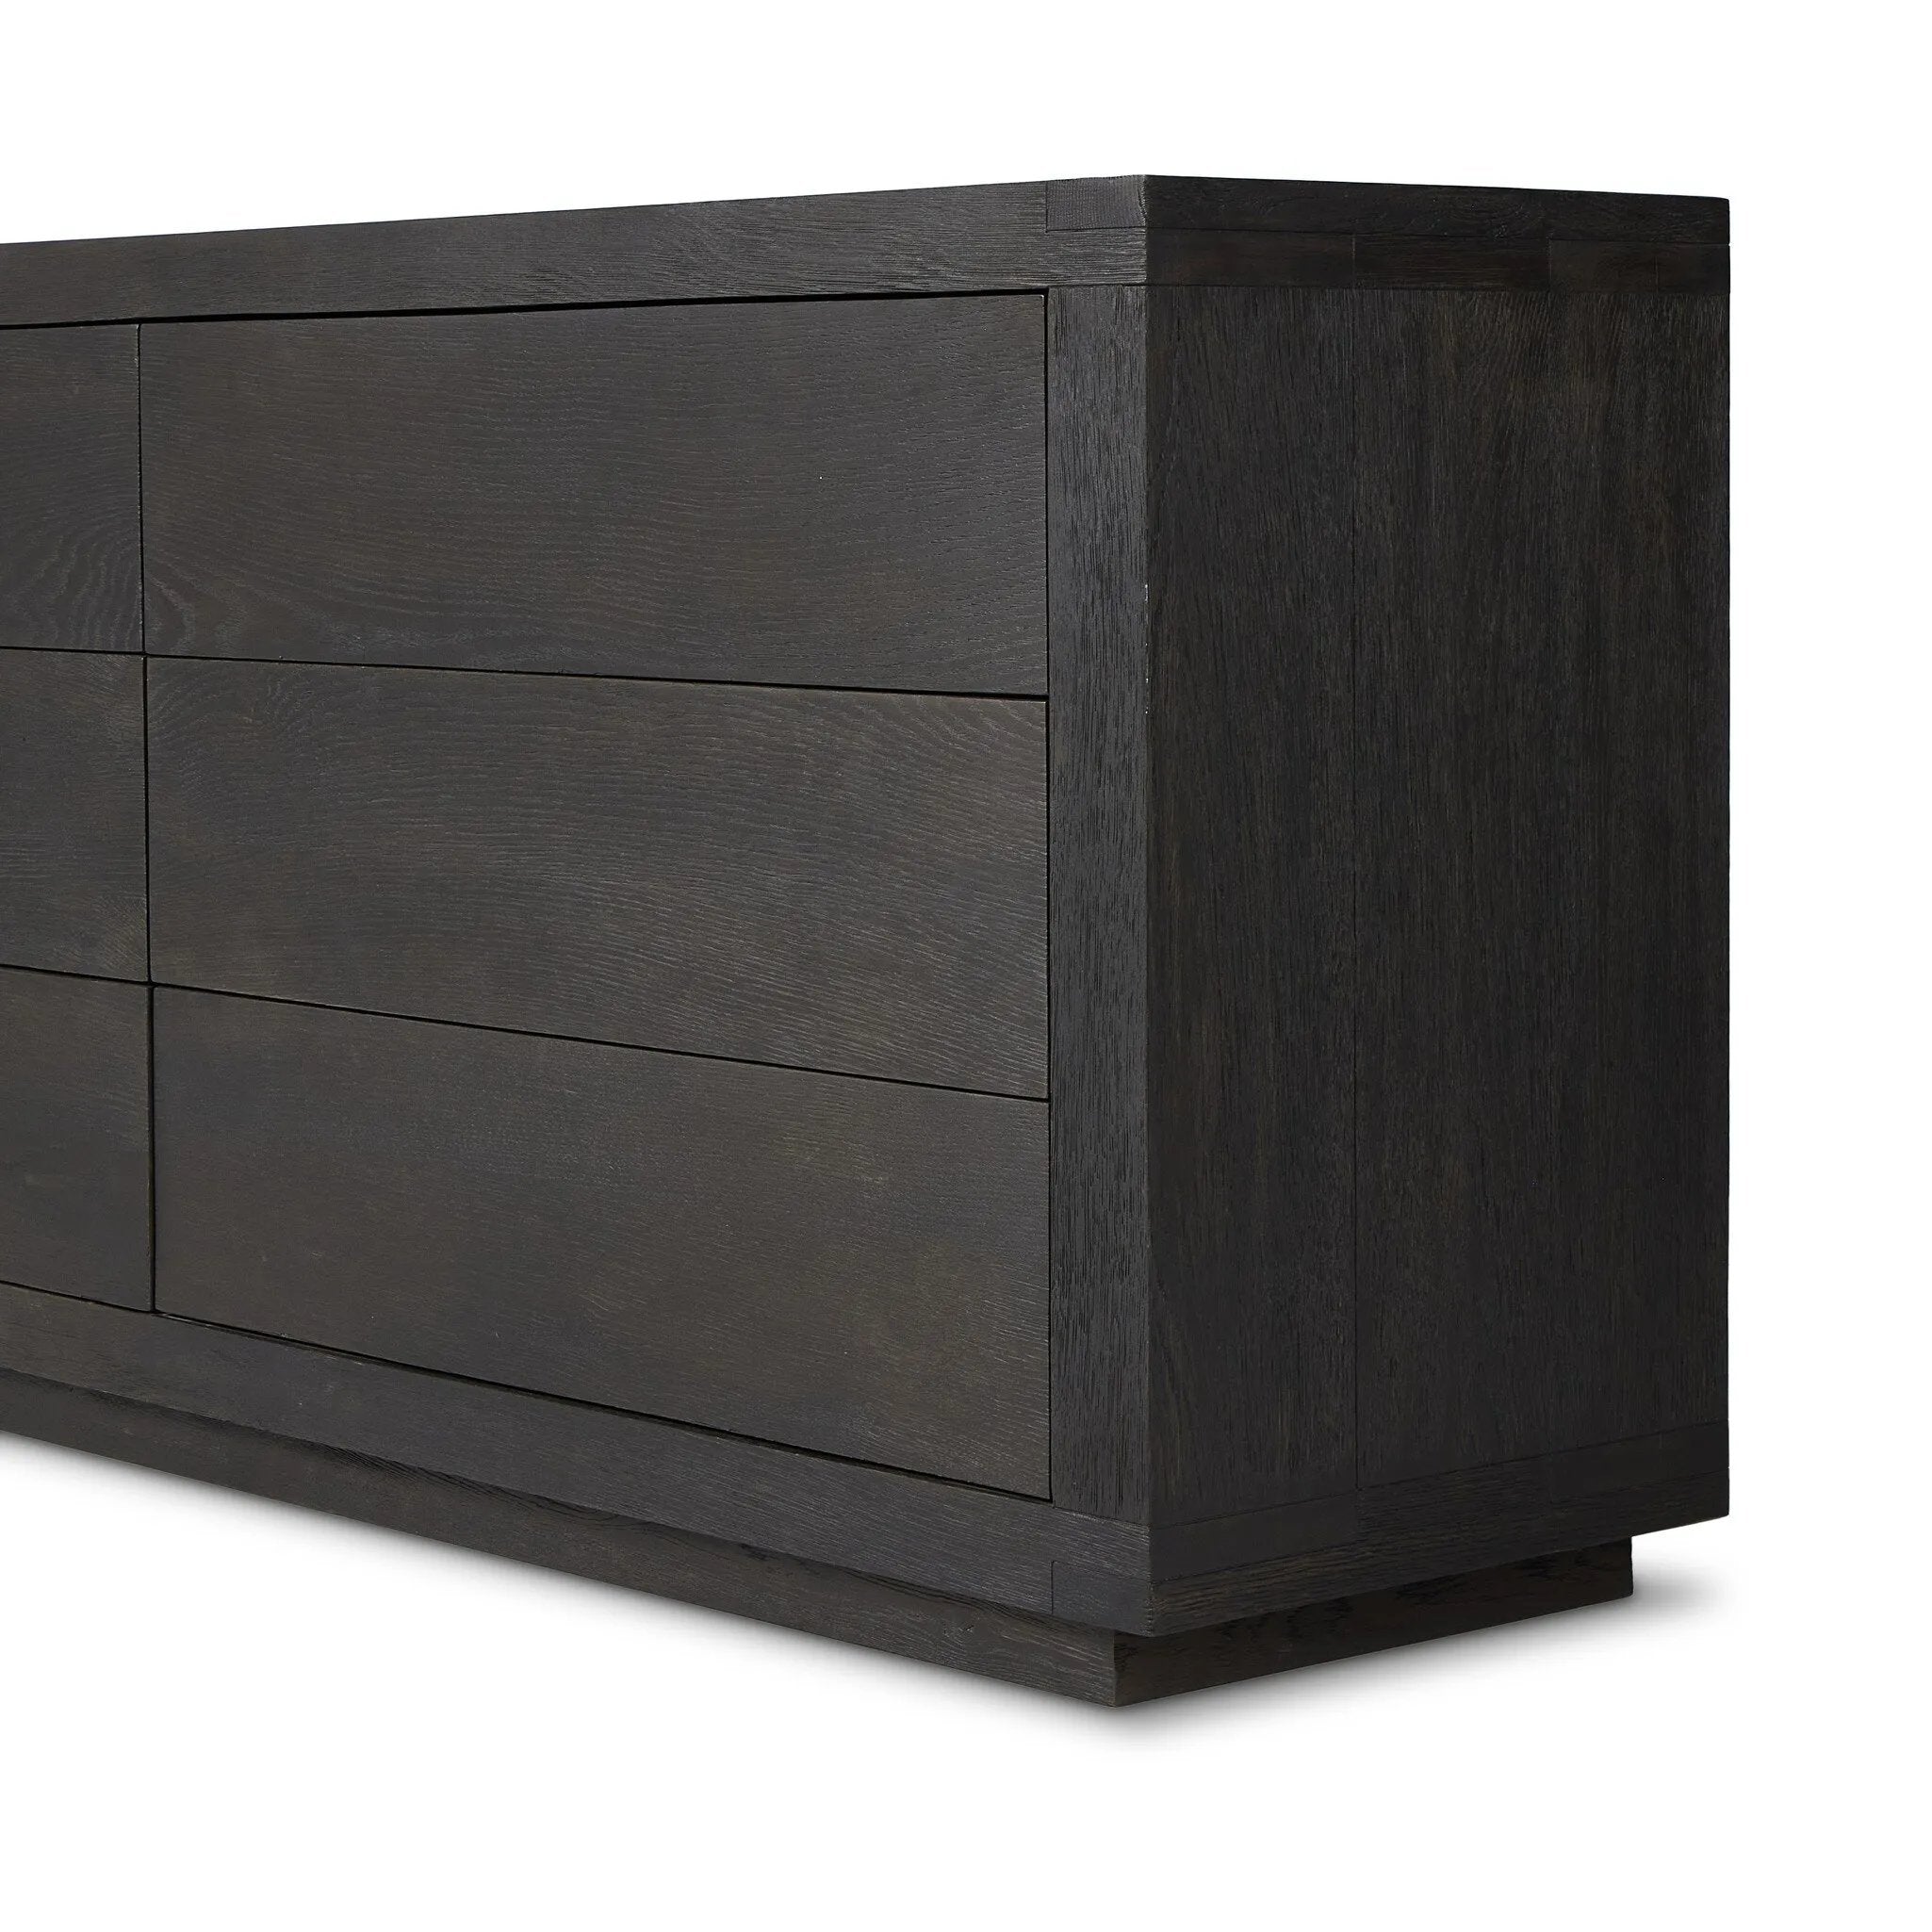 Black-finished oak shapes a streamlined box-style dresser, with lap joint corners for a detail-driven touch.Collection: Bennet Amethyst Home provides interior design, new home construction design consulting, vintage area rugs, and lighting in the Newport Beach metro area.